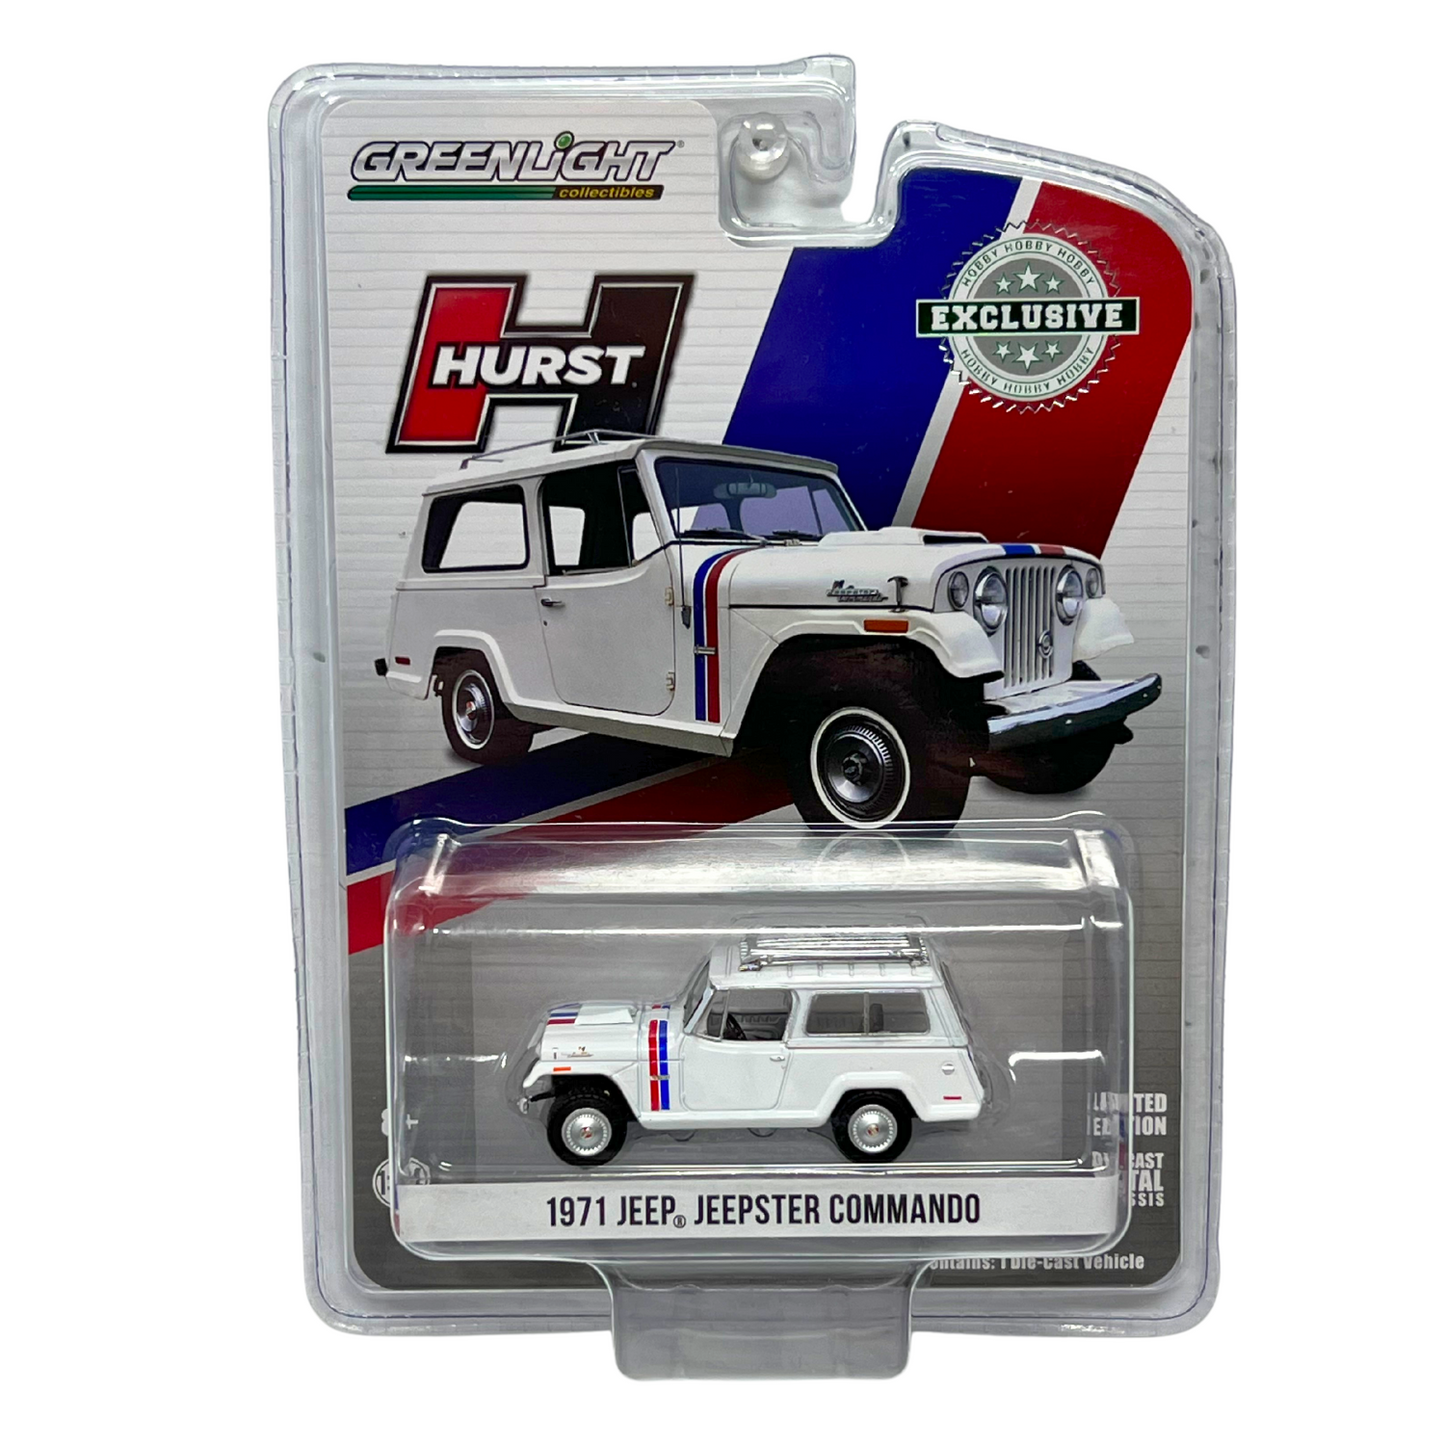 Greenlight Hobby Exclusive Hurst 1971 Jeep Jeepster Commando 1:64 Diecast